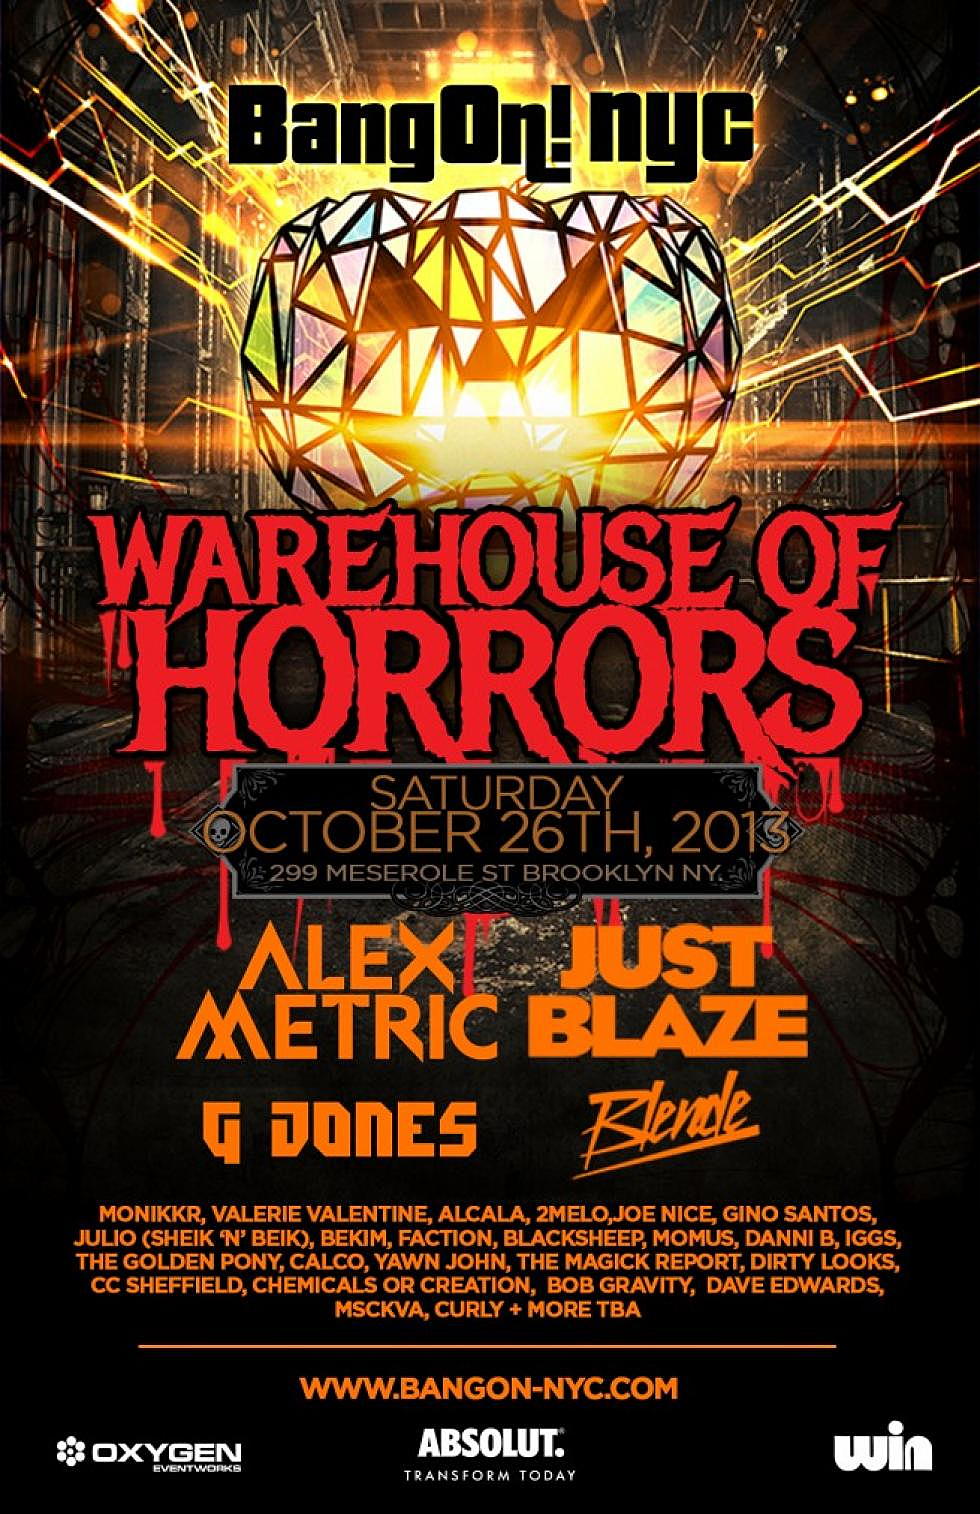 Contest: Win 2 Tickets to BangOn! Warehouse Of Horrors in Brooklyn 10/26